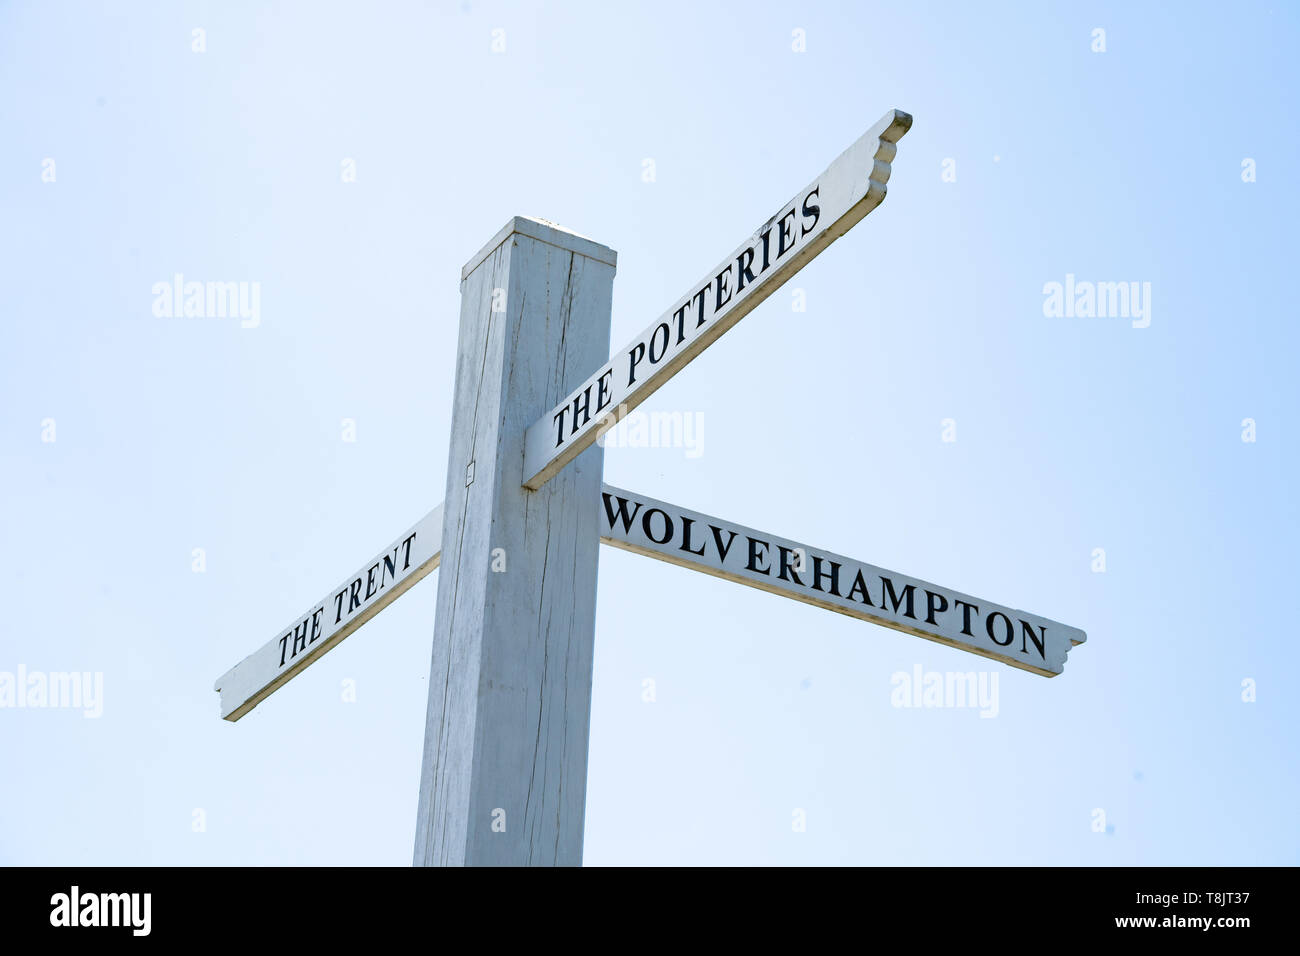 Wooden signpost for The Potteries, The Trent, Wolverhampton on the junction of the Trent and Mersey canal and the Staffordshire and Worcester canal Stock Photo